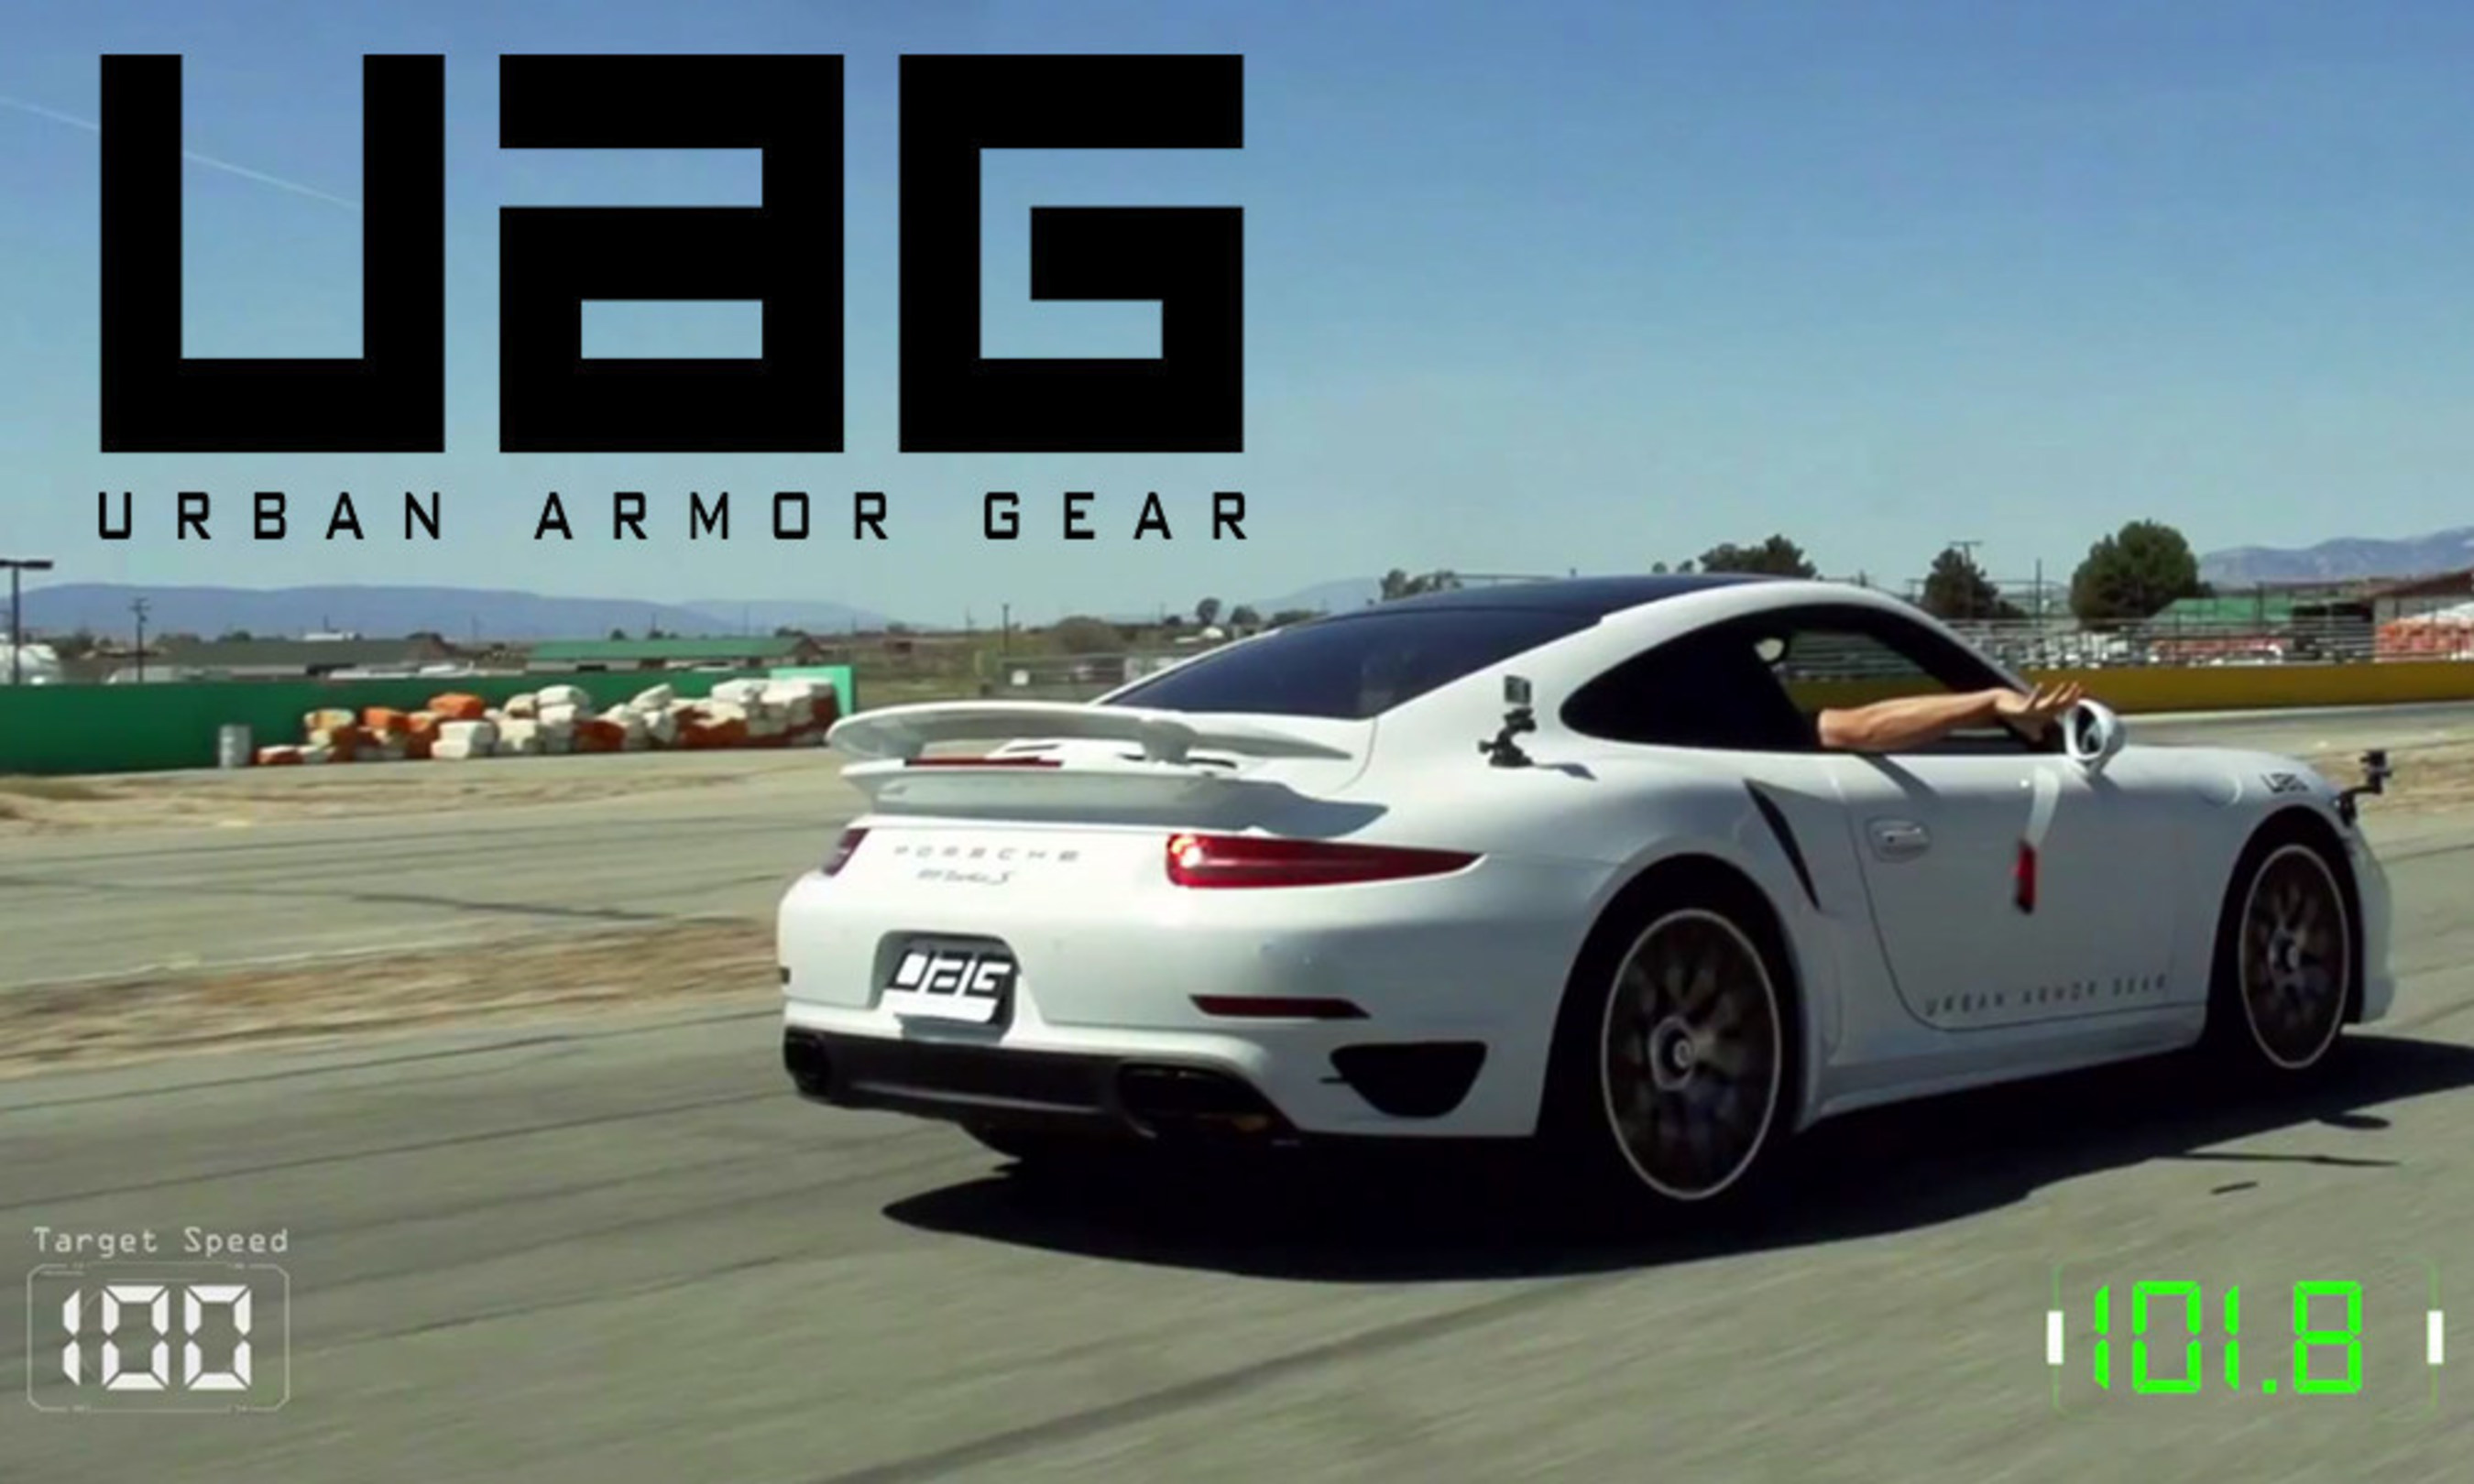 URBAN ARMOR GEAR DROPS AN IPHONE 6 FROM A MOVING VEHICLE TESTING THE LAWS OF PHYSICS - Watch a Brand New iPhone 6 Protected by UAG Folio Case Survive a 121.9mph Drop from Moving Vehicle